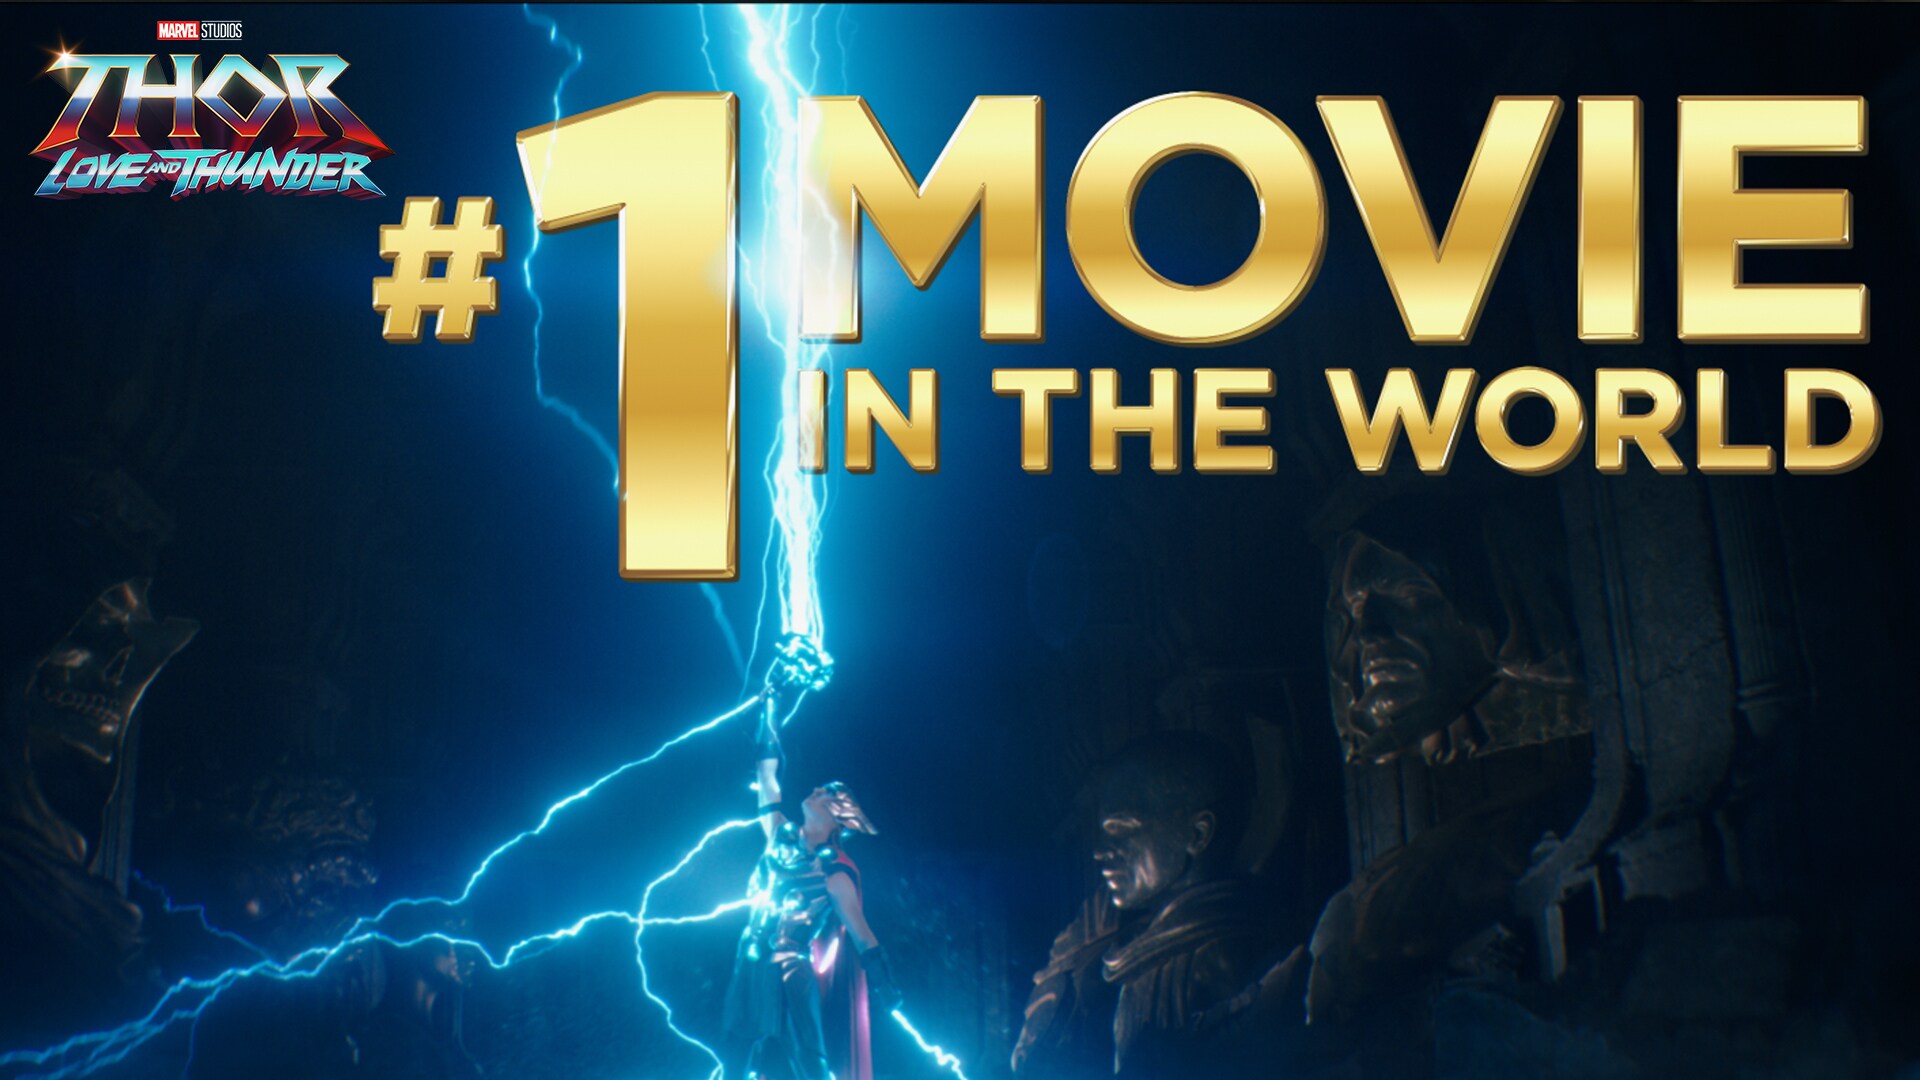 Marvel Studios' Thor: Love and Thunder | Number One Movie In The World